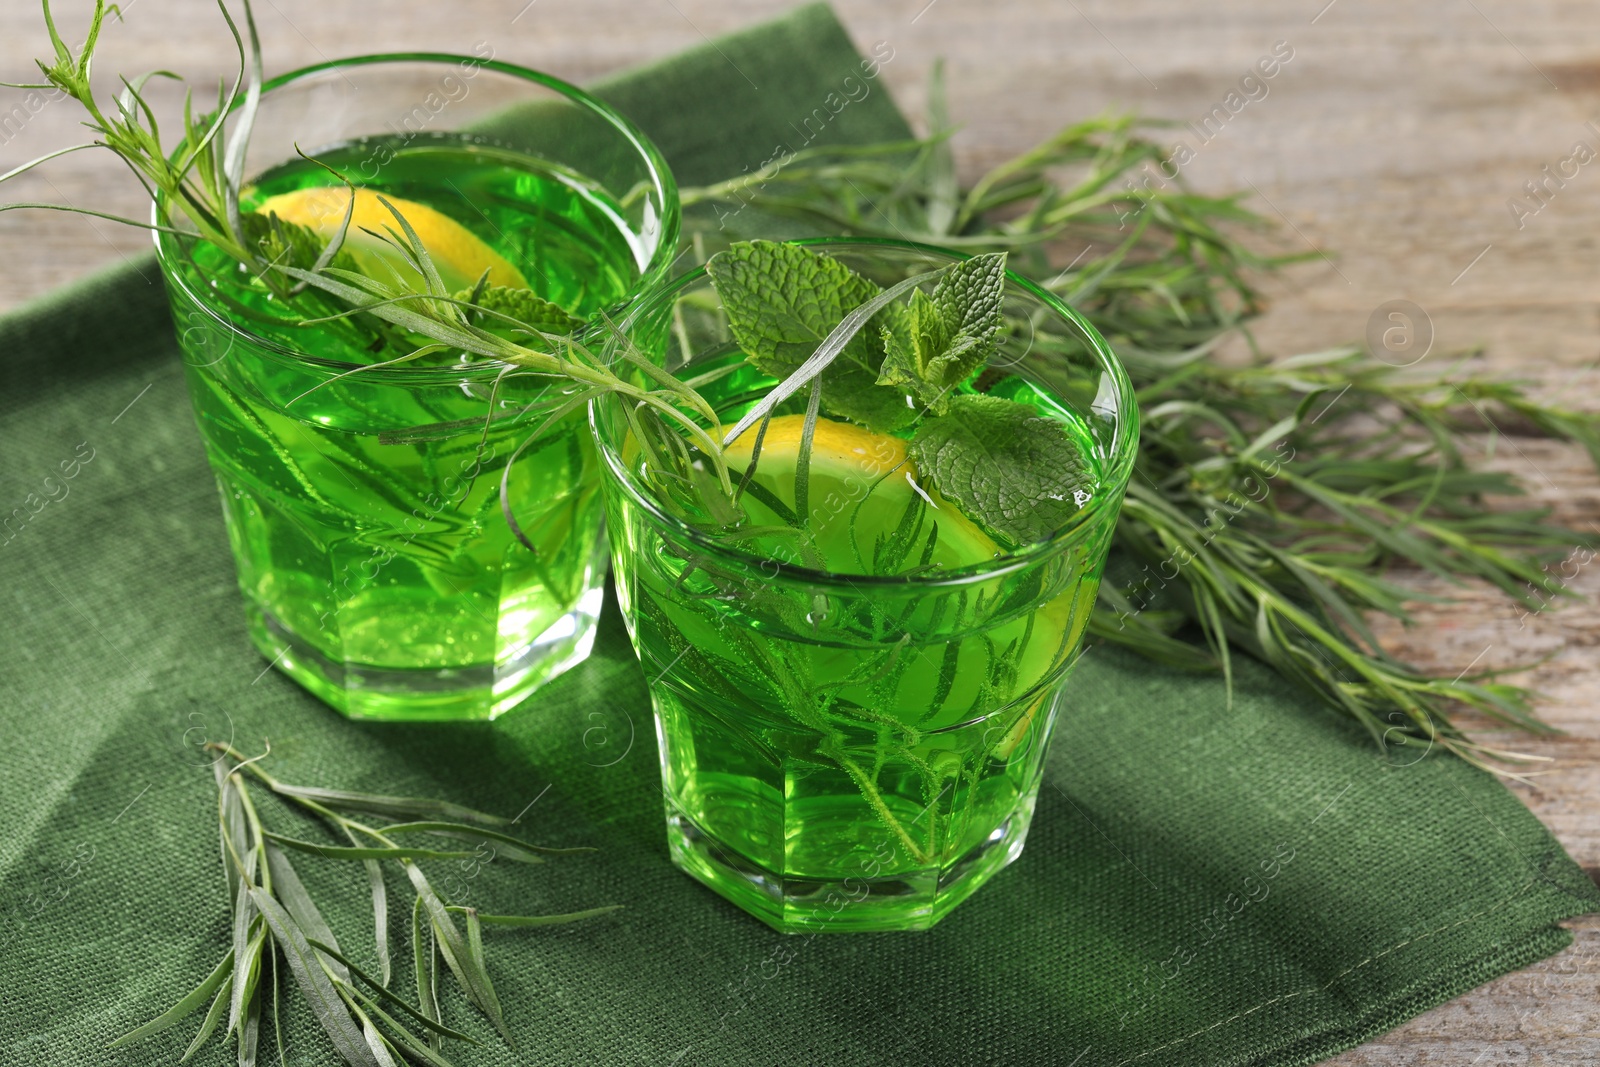 Photo of Glasses of refreshing tarragon drink with lemon slices on wooden table